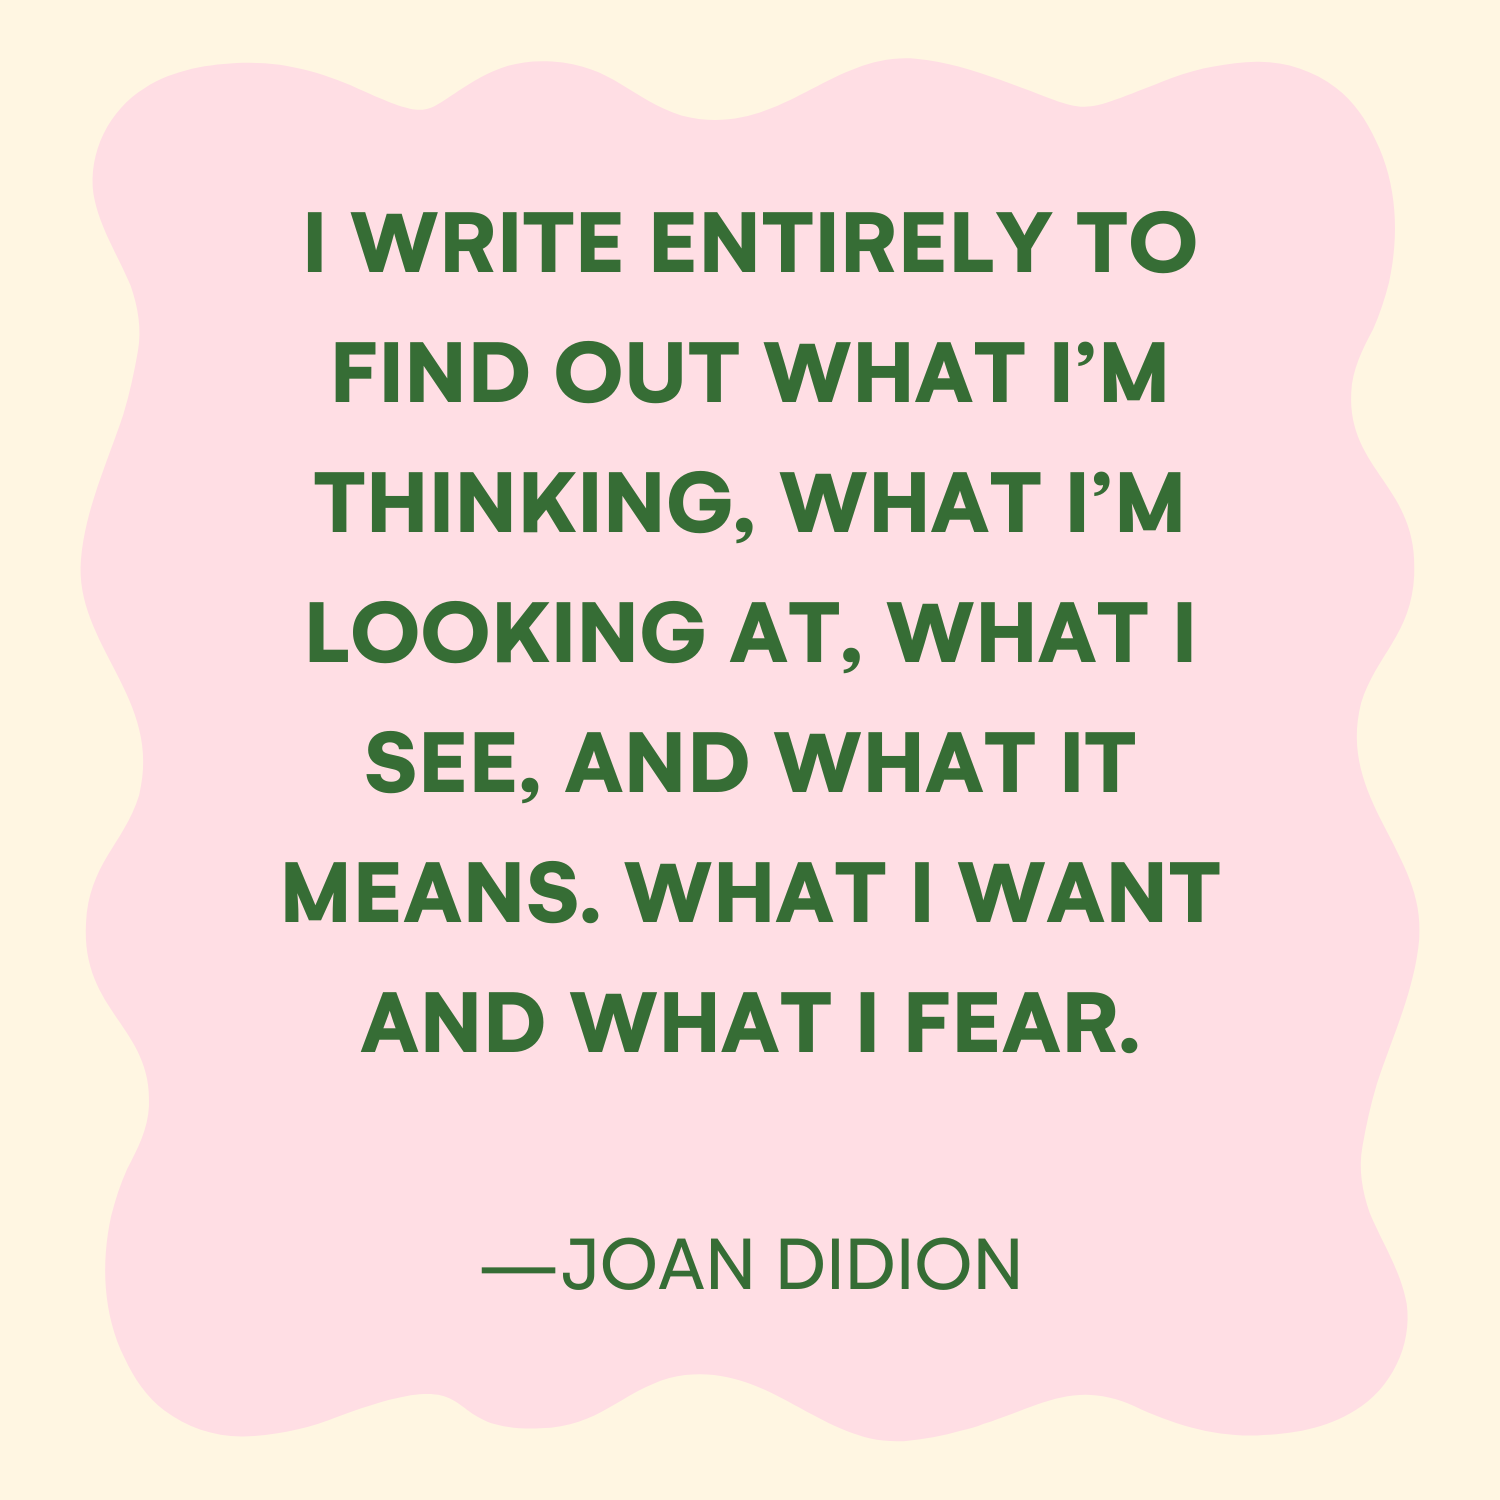 <p>"I write entirely to find out what I'm thinking, what I'm looking at, what I see, and what it means. What I want and what I fear." —Joan Didion </p>